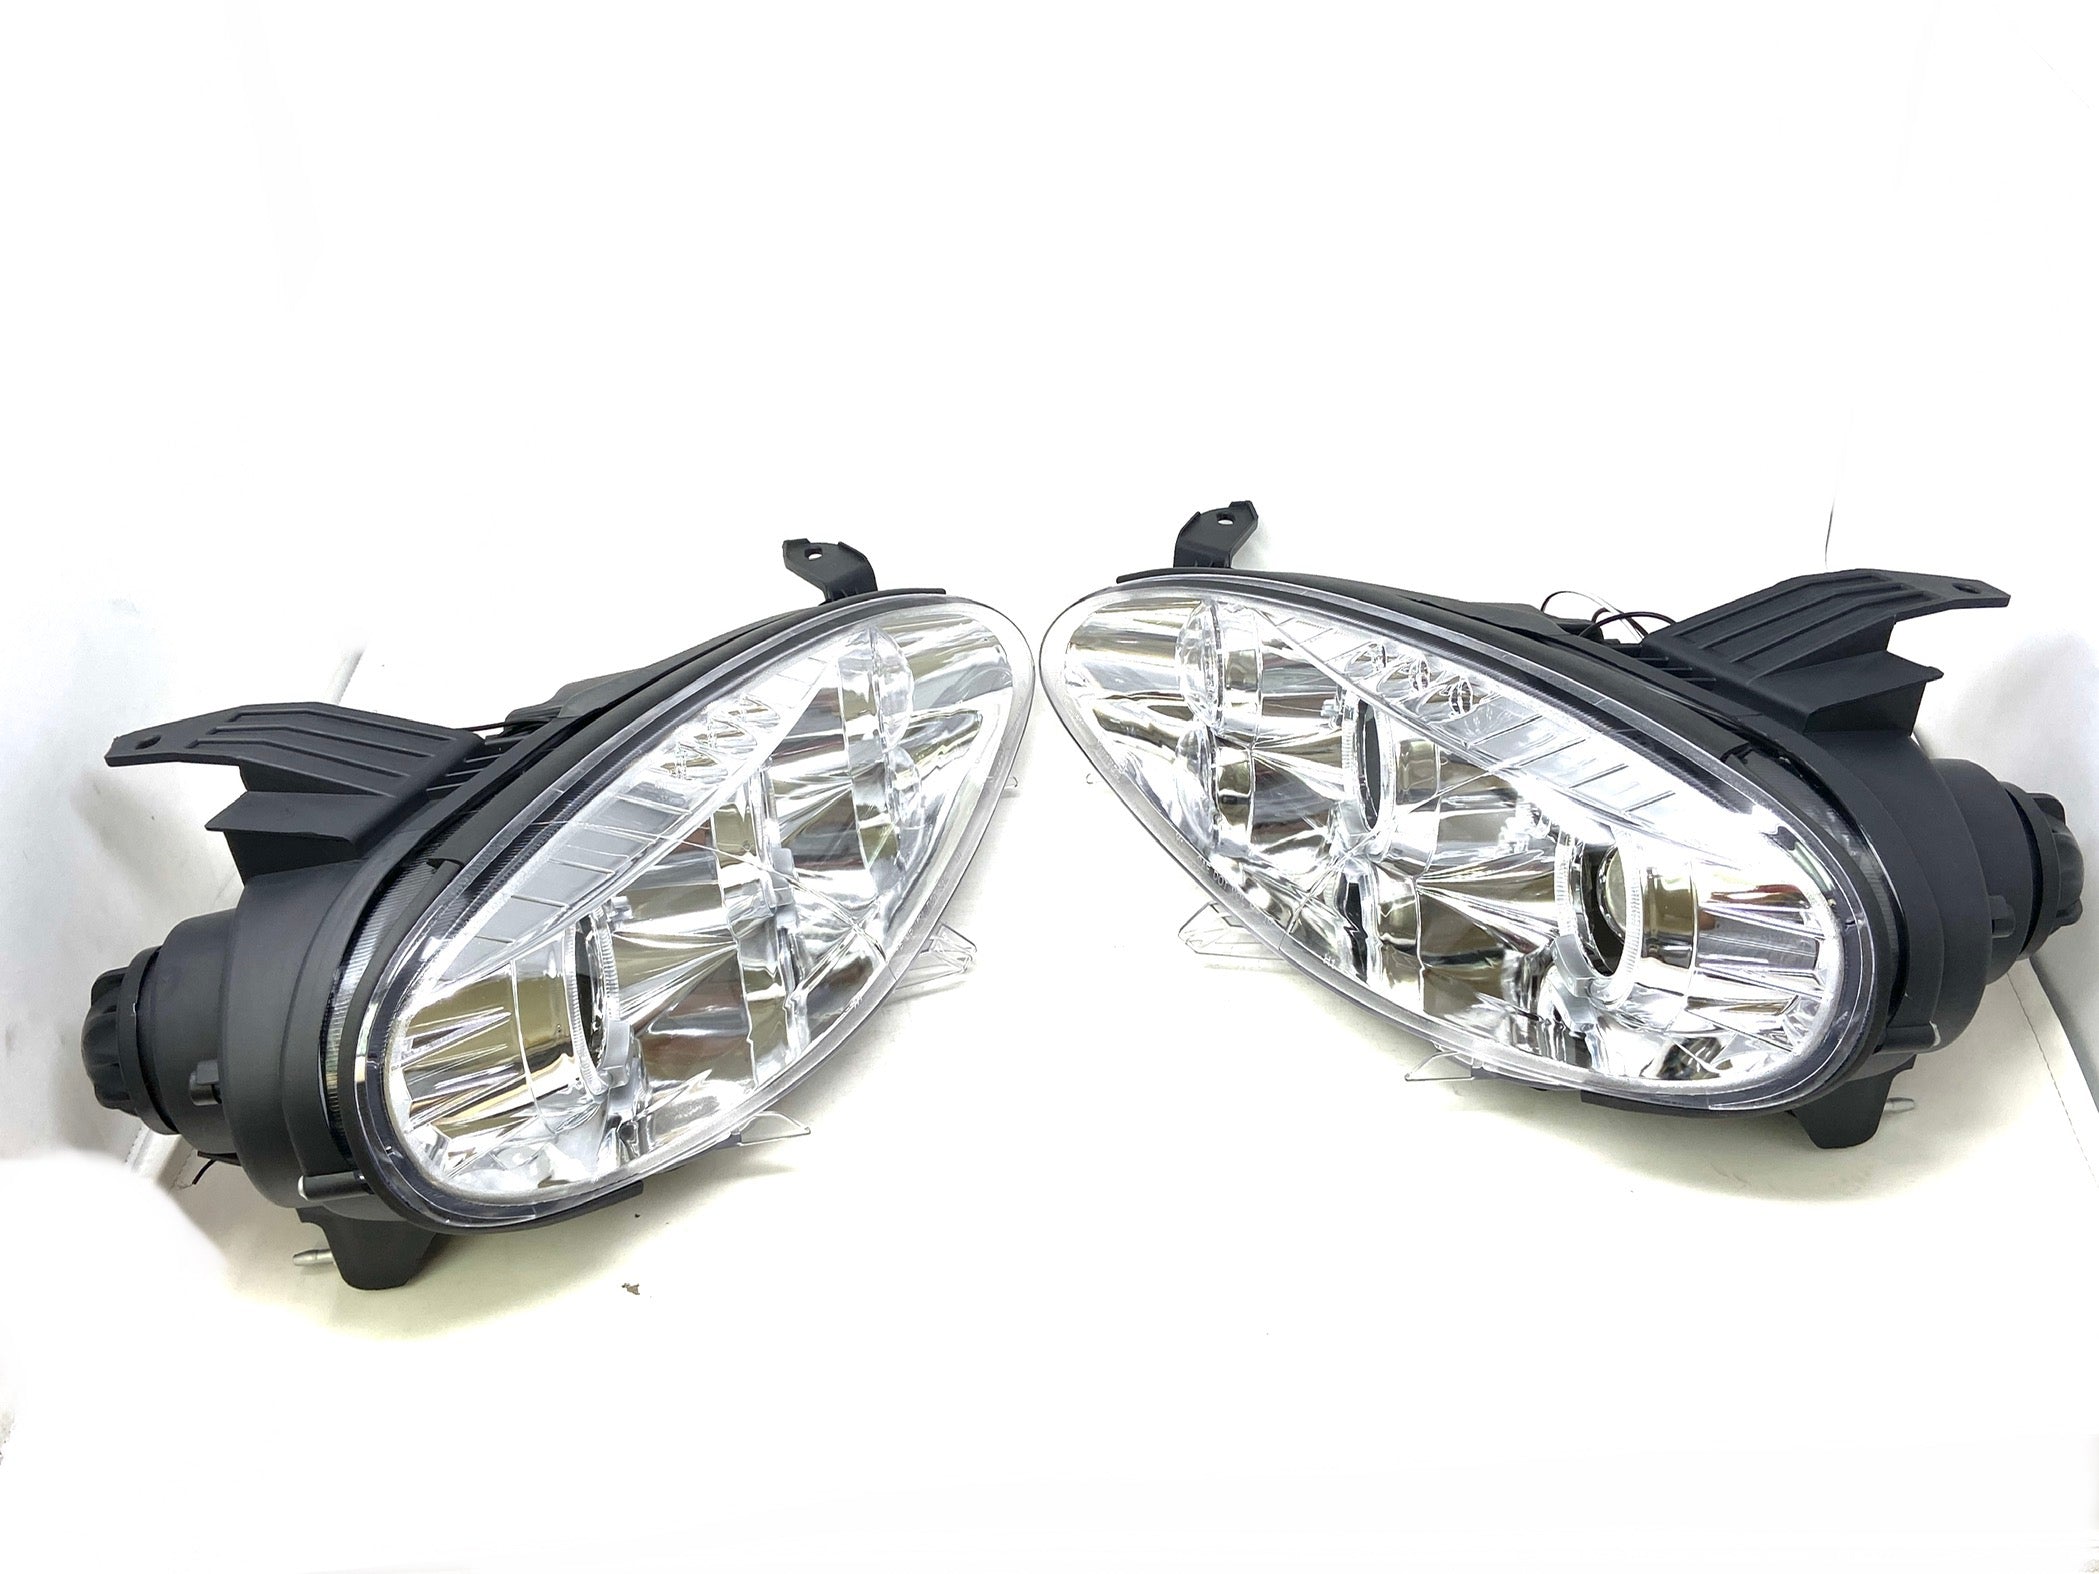 Head Lights Projector Lamps for Mazda Miata NB 98-05 MX-5 Clear Lamp Pair